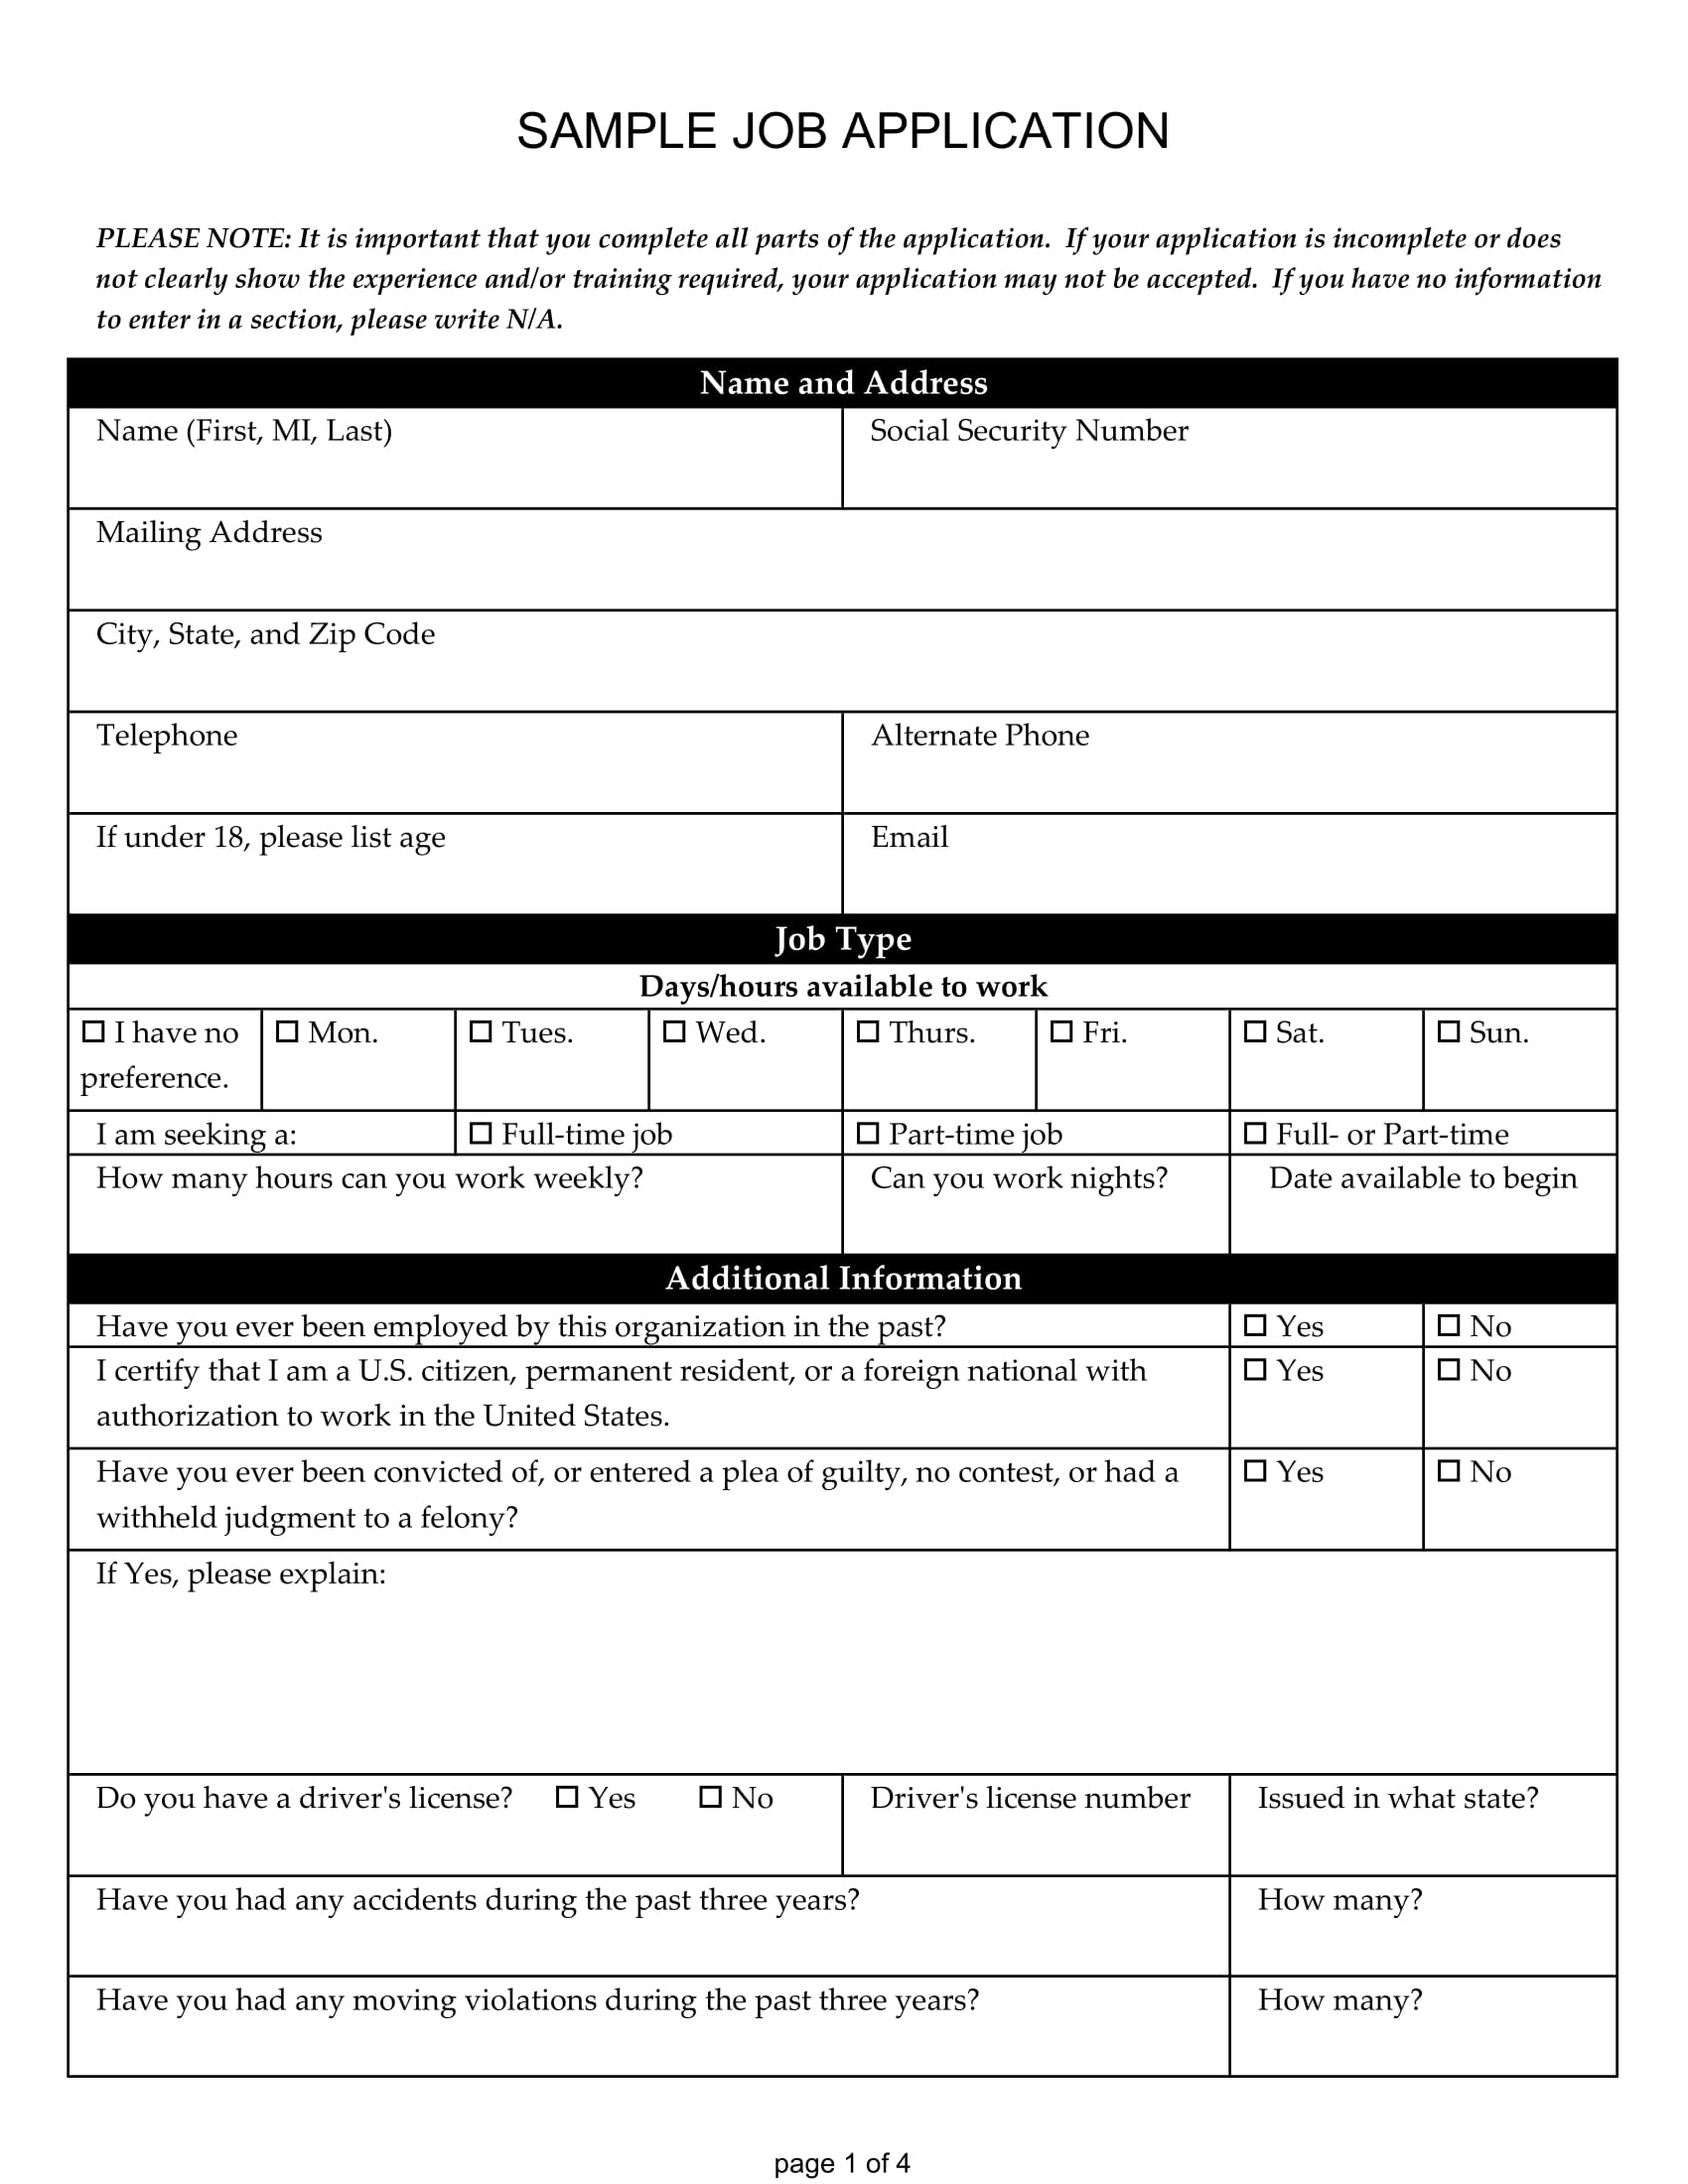 Is it safe to fill out job applications online